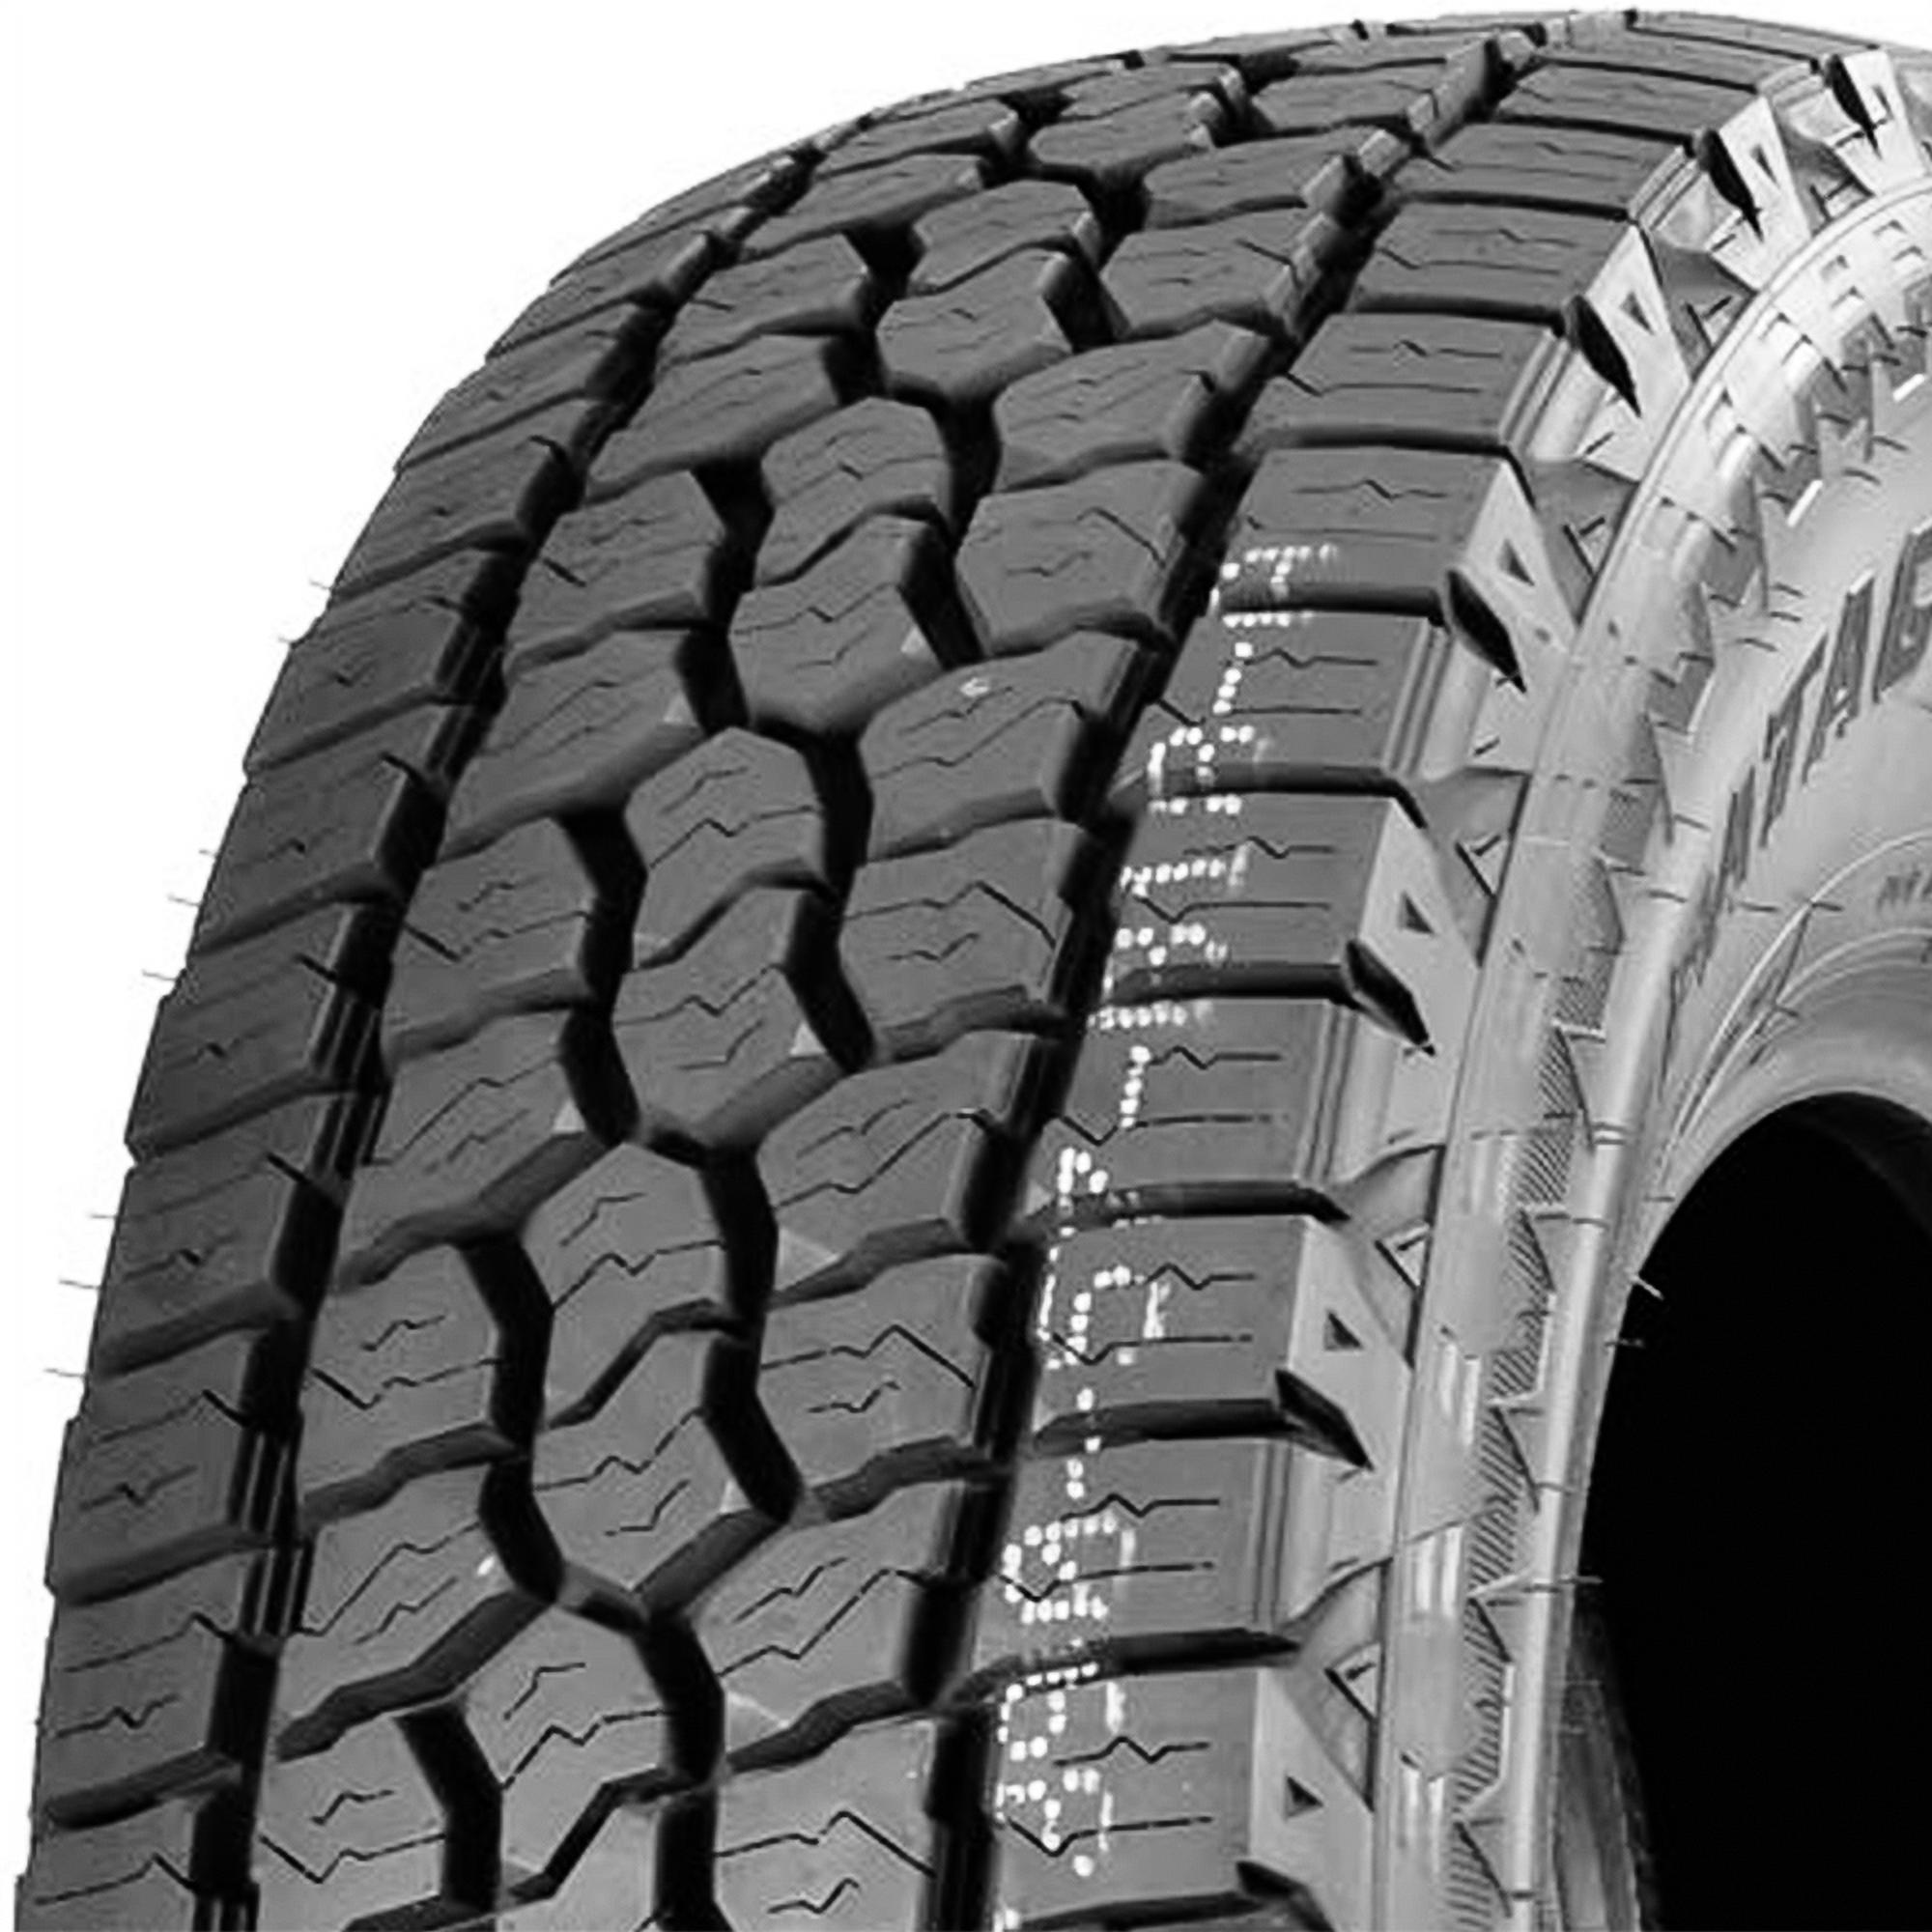 Pair of 2 (TWO) Milestar Patagonia A/T R 265/60R18 114T XL Rugged Terrain Tires Fits: 2014-15 Jeep Grand Cherokee Summit, 2017-21 Jeep Grand Cherokee Trailhawk - image 2 of 3